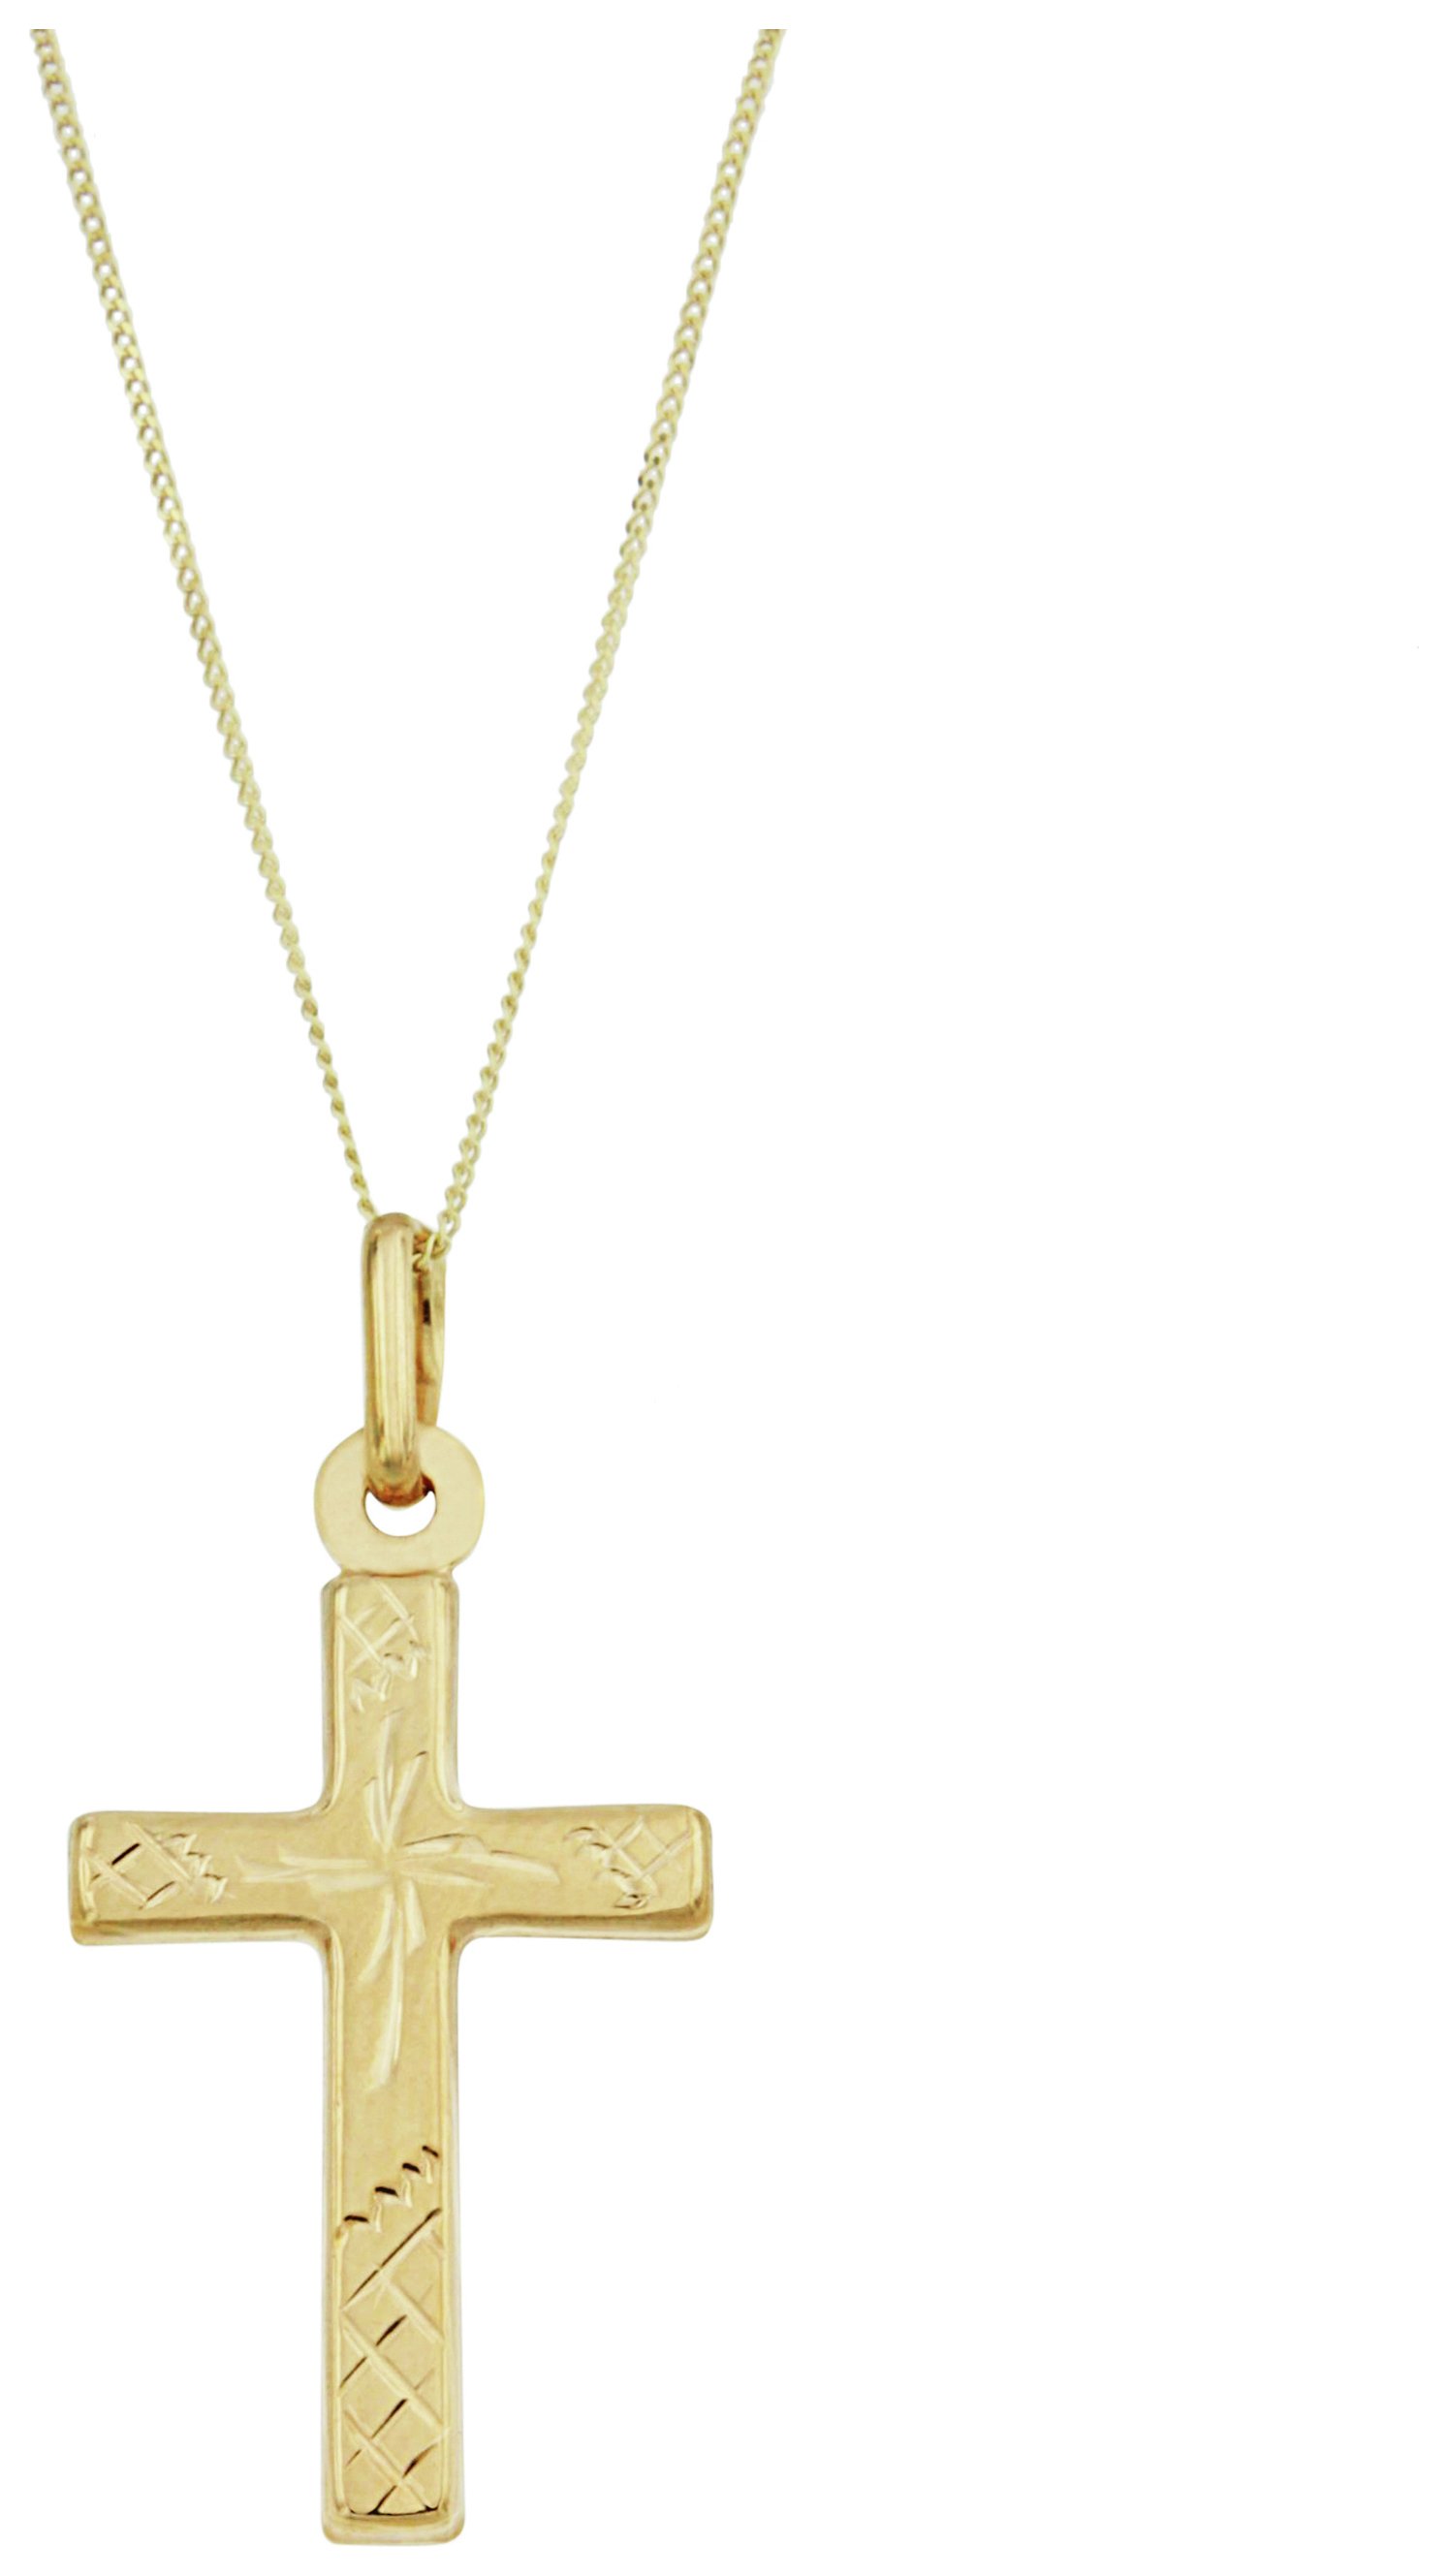 Bracci 9ct Gold Solid Look Cross Pendant Necklace.